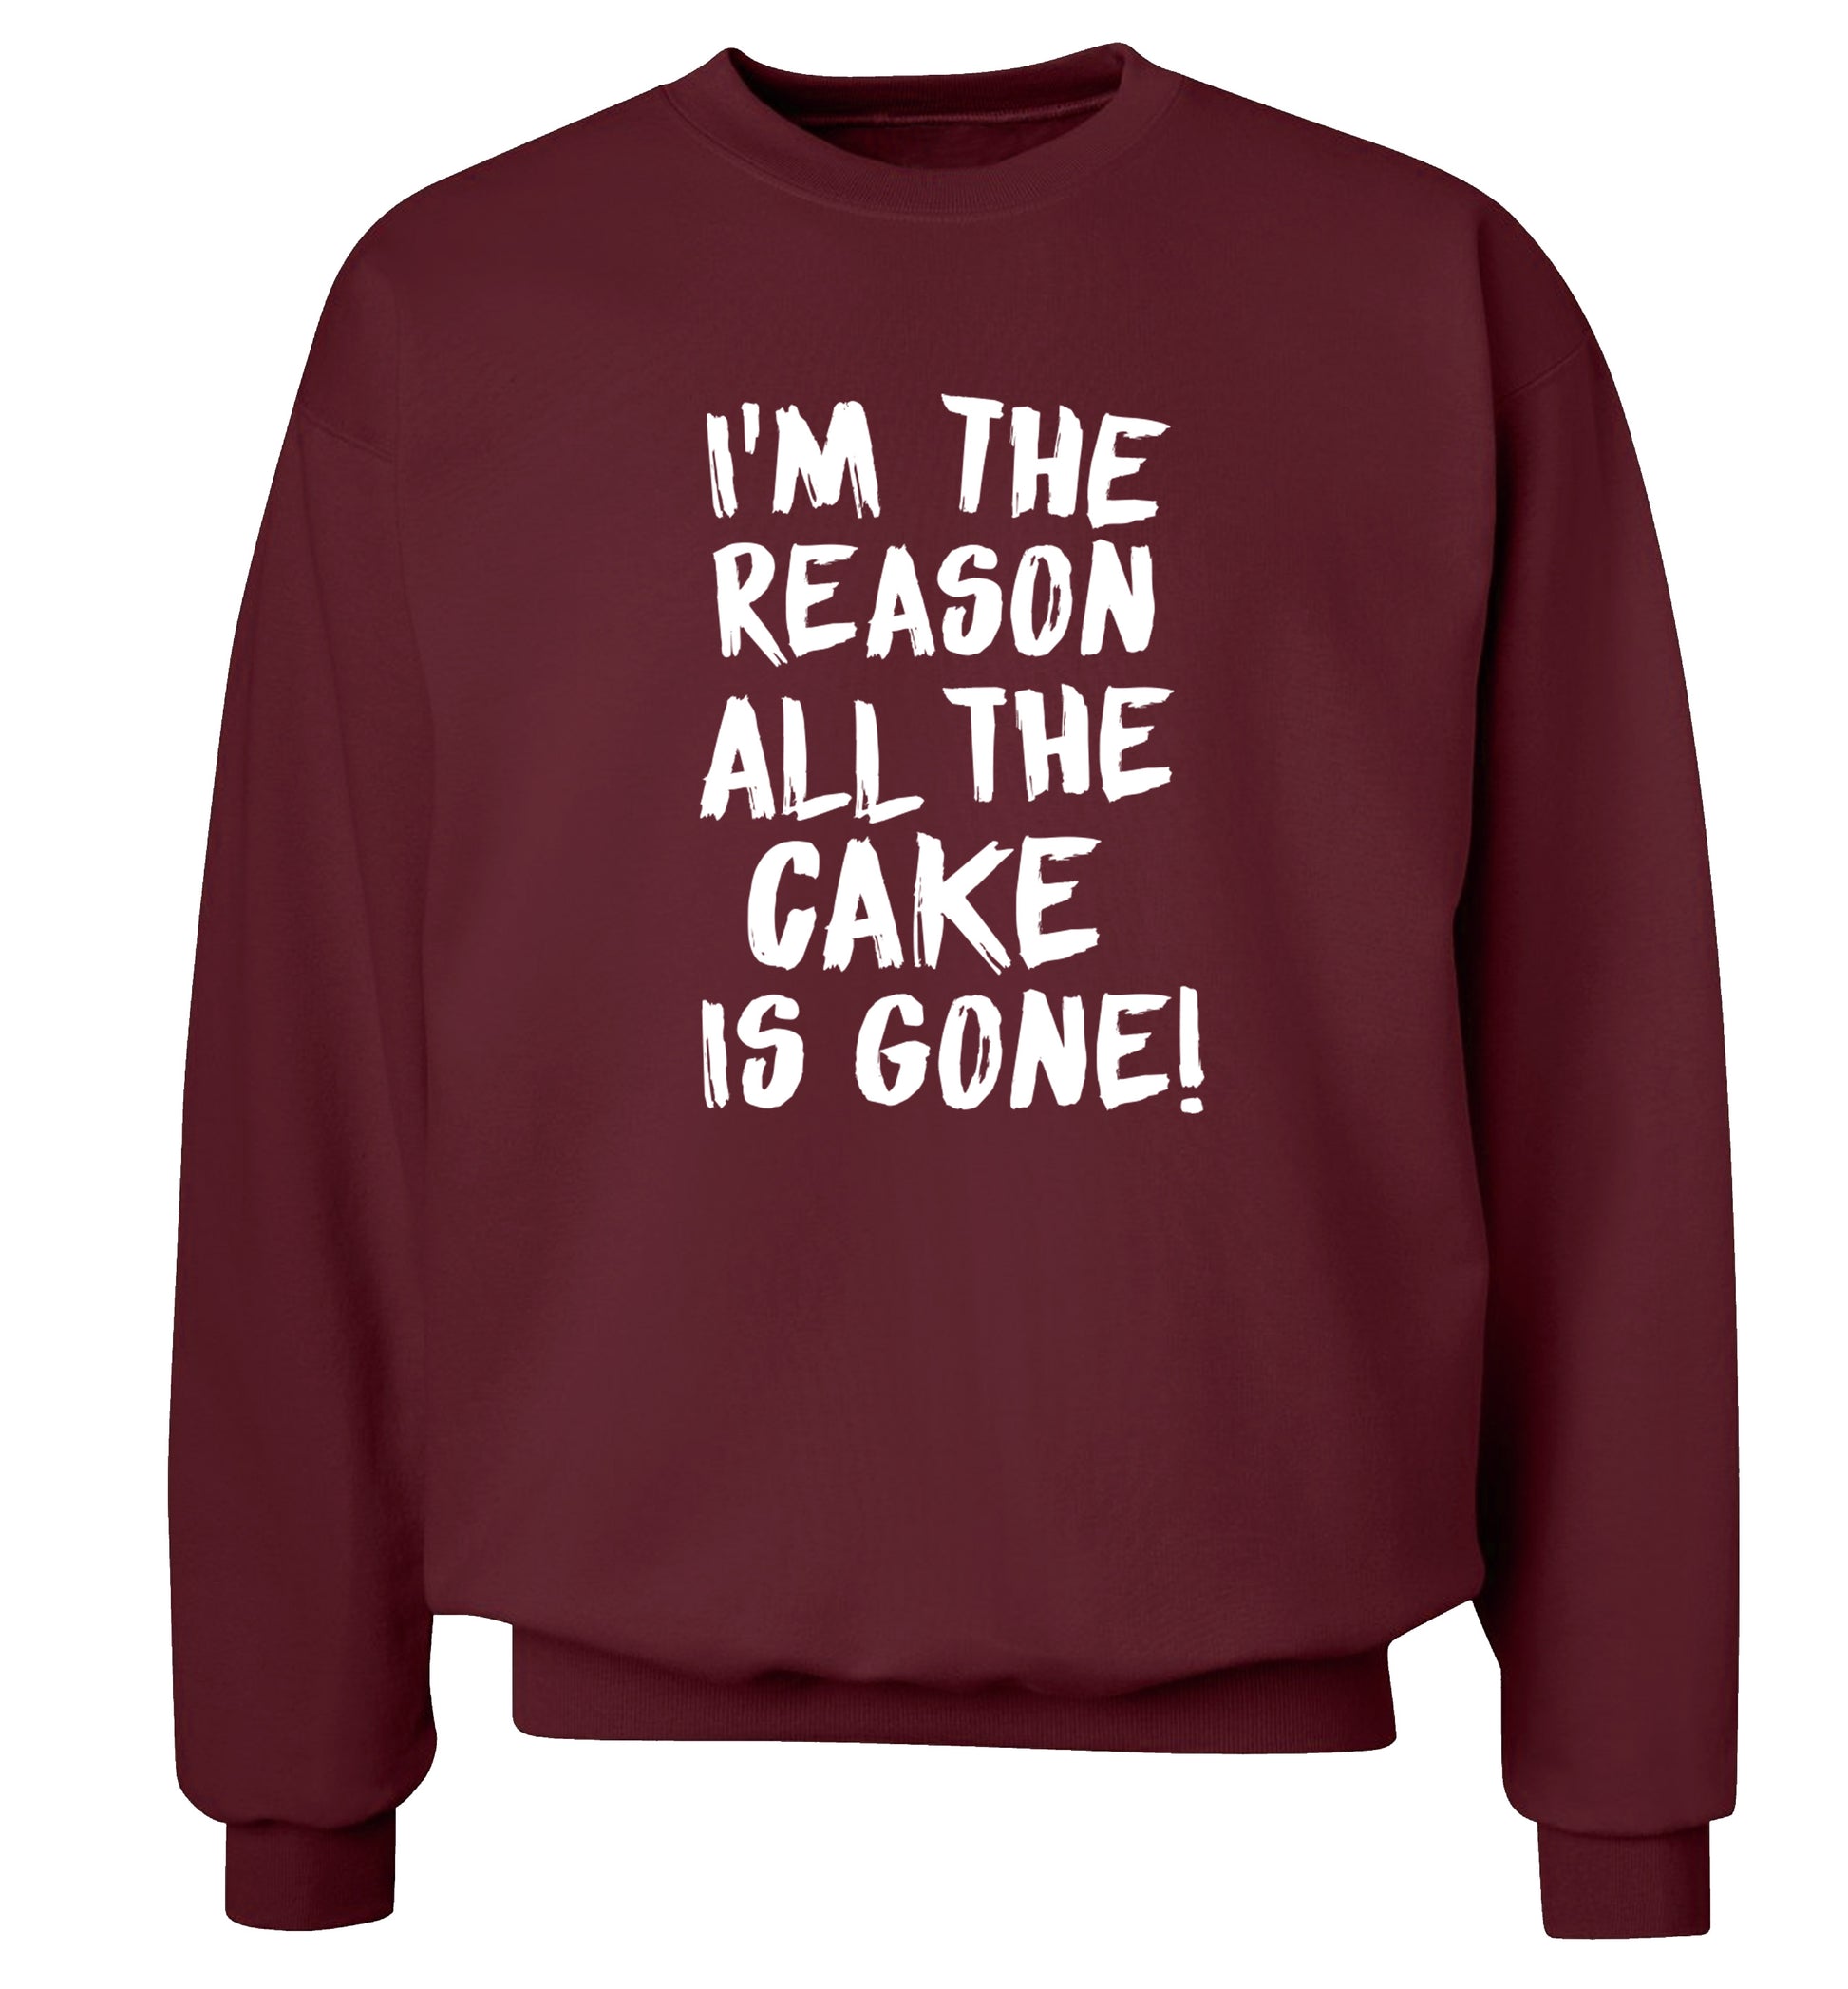 I'm the reason all the cake is gone Adult's unisex maroon Sweater 2XL